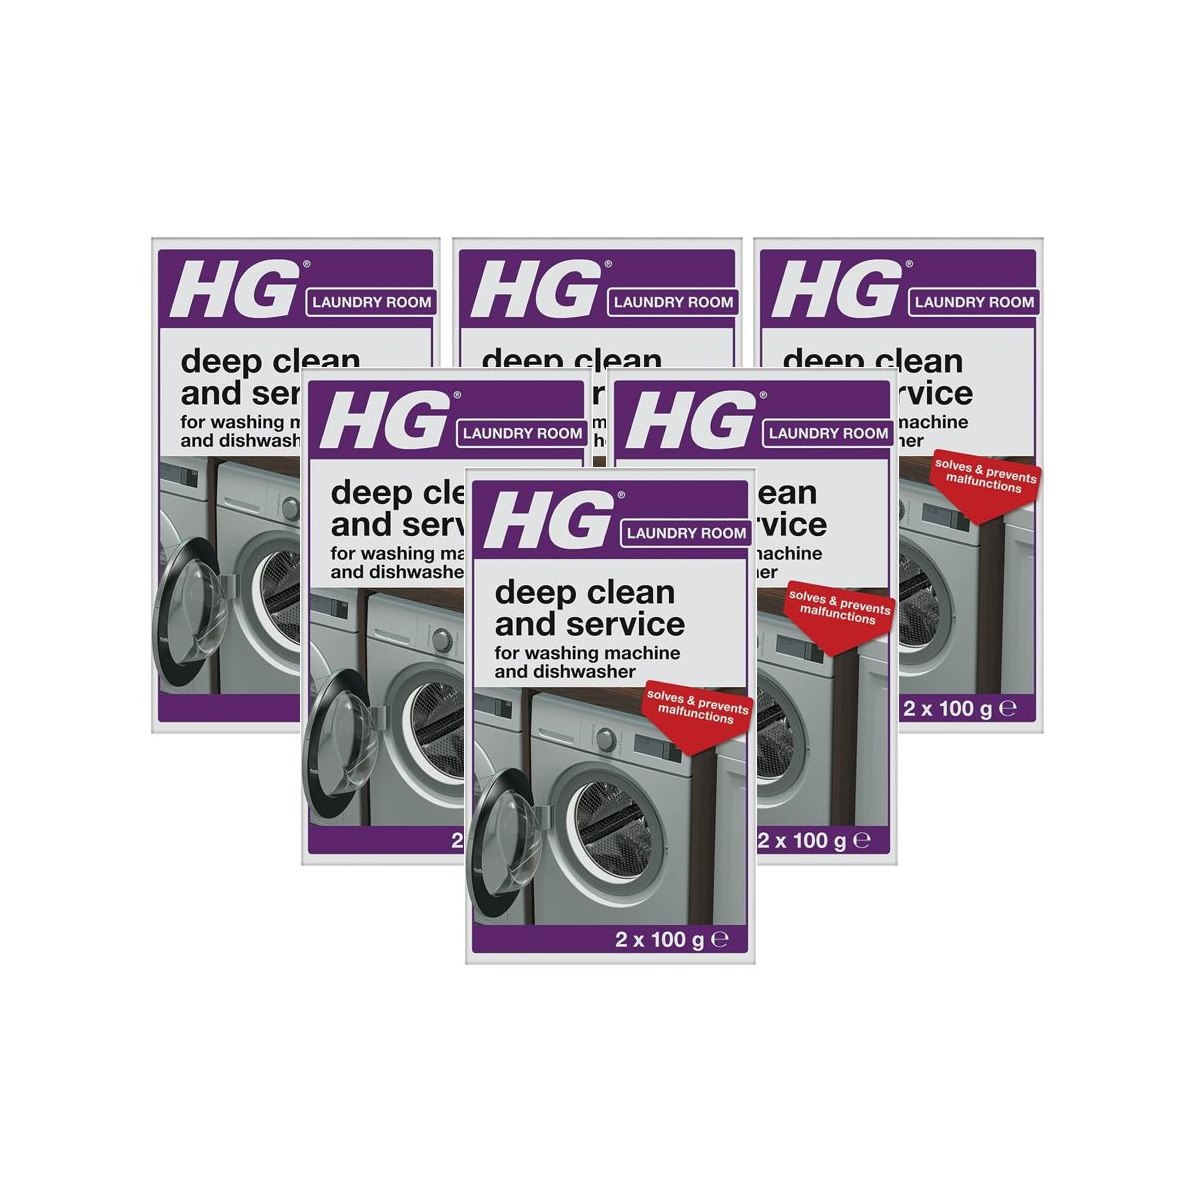 Case of 6x HG Deep Clean and Service for washing machine and dishwasher